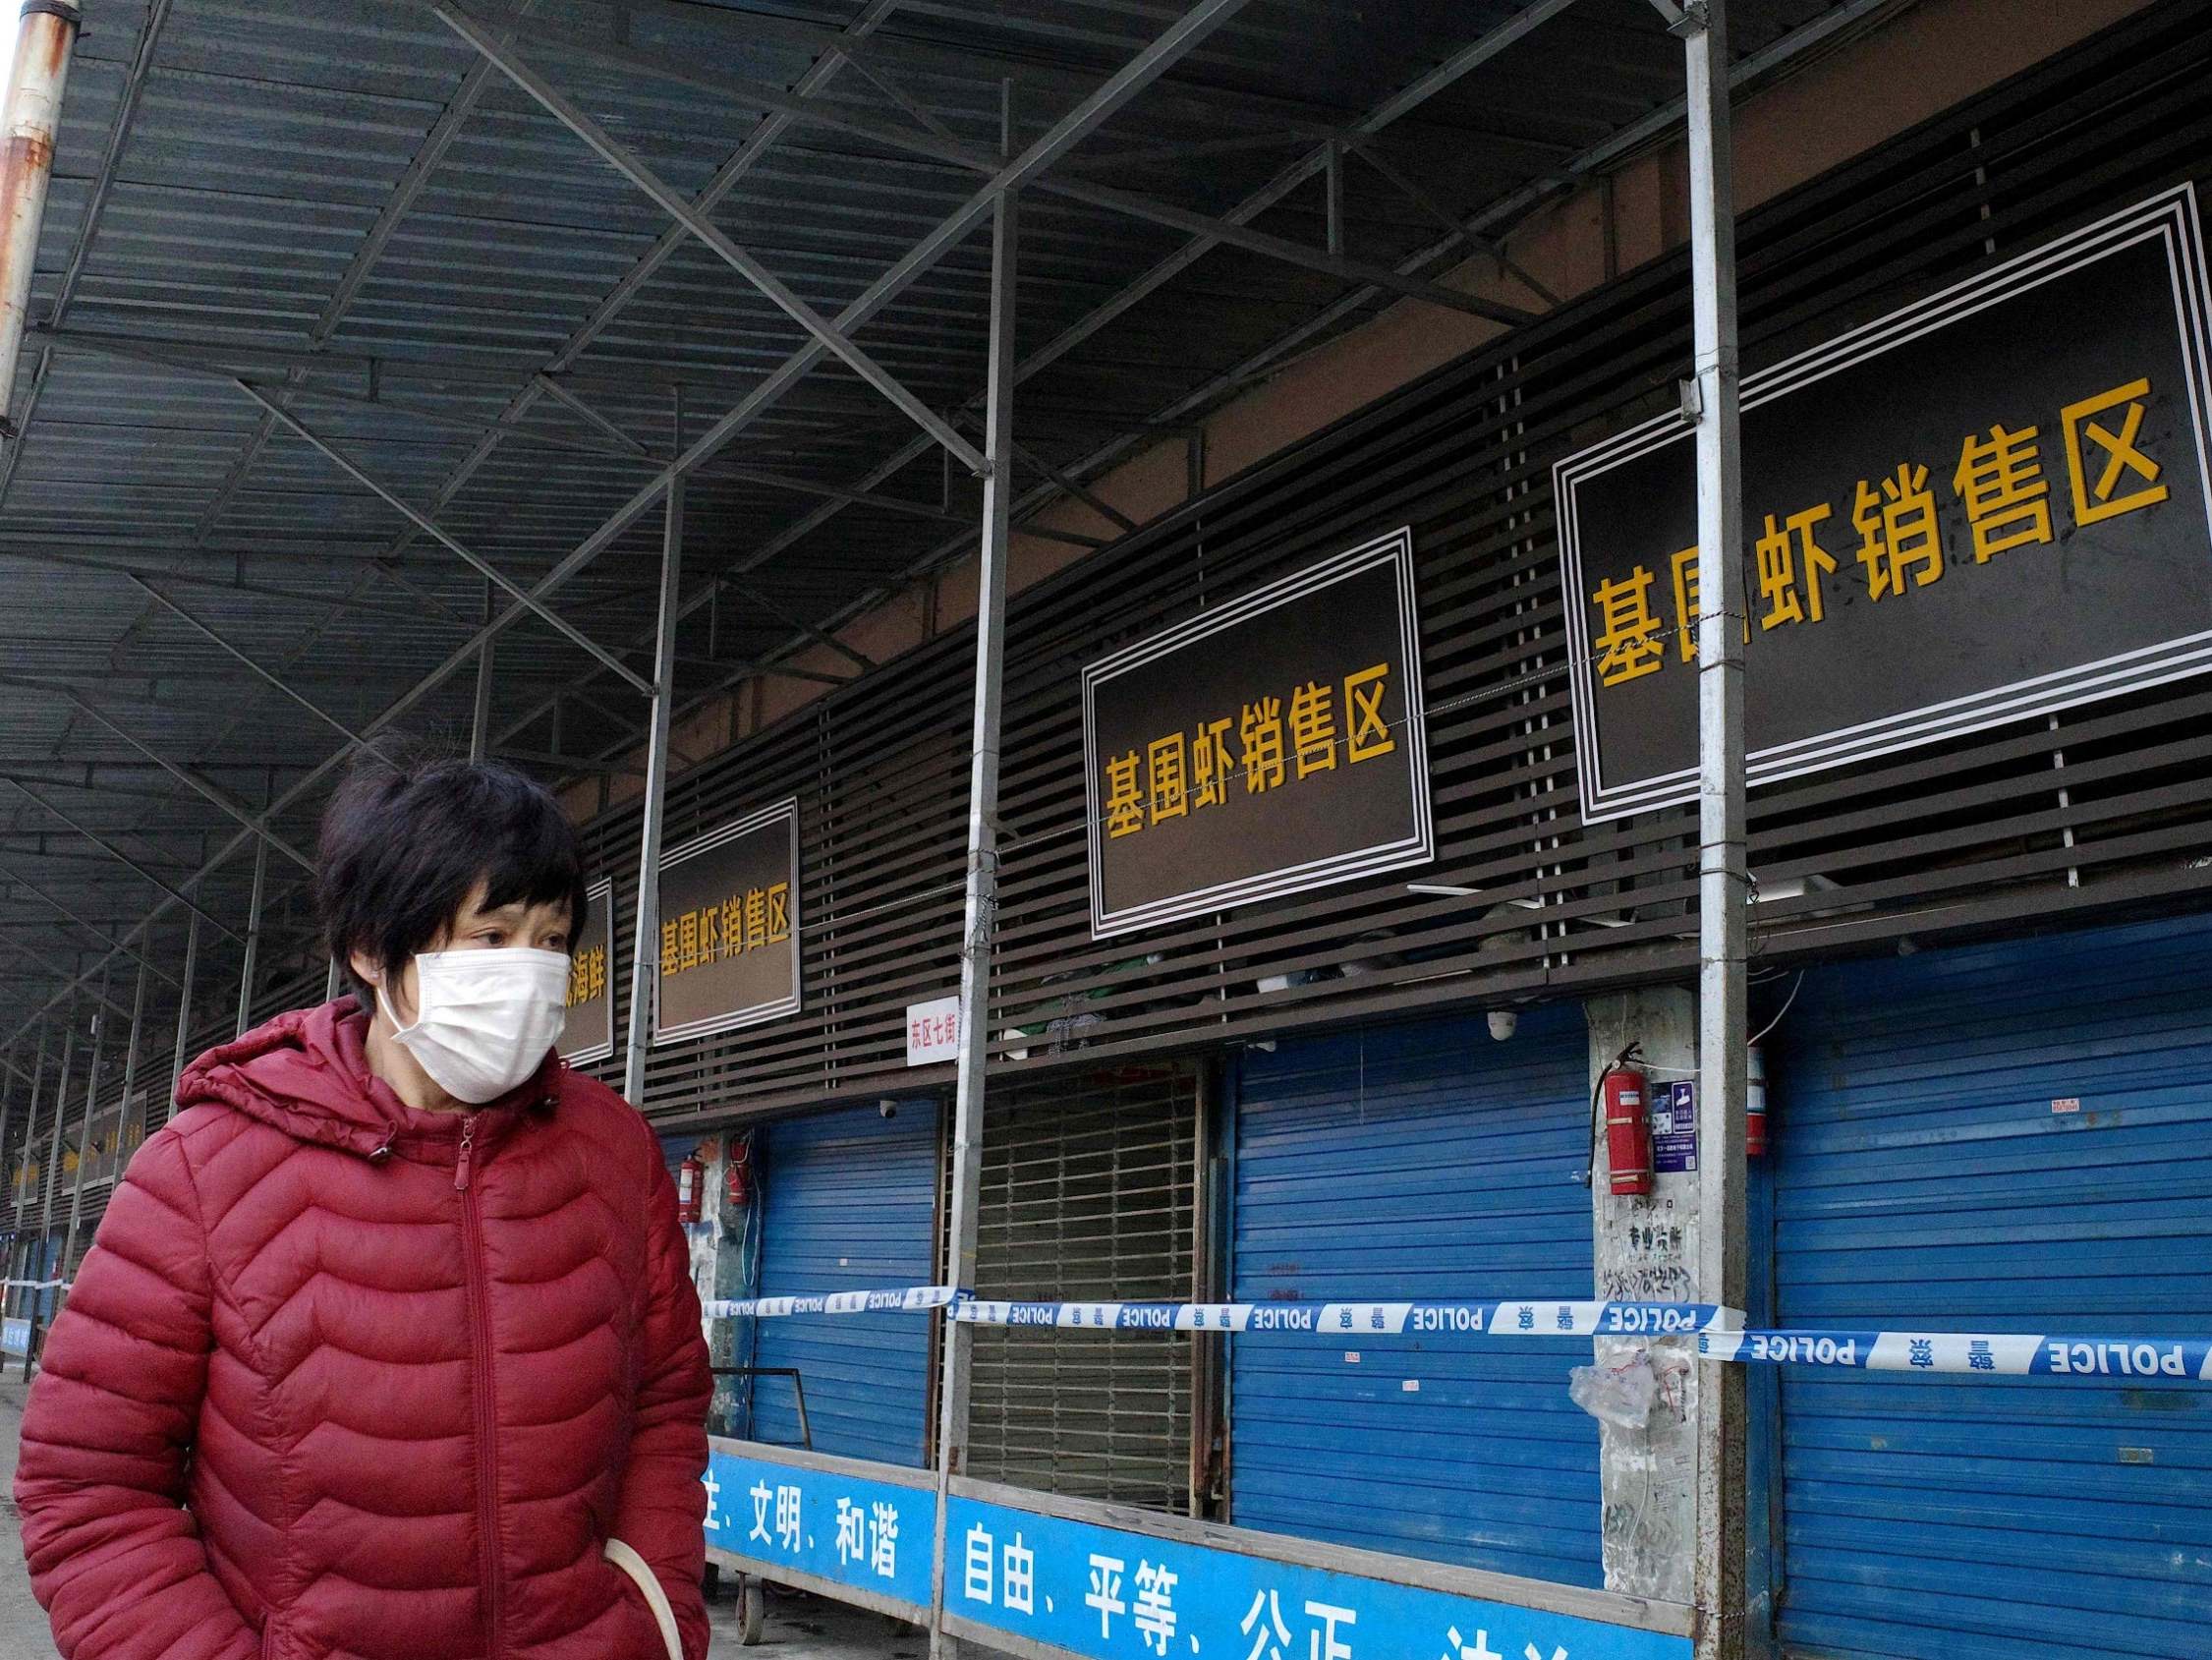 A woman walks in front of the closed Huanan wholesale seafood market, where health authorities say a man who died from a respiratory illness had purchased goods from, in the city of Wuhan